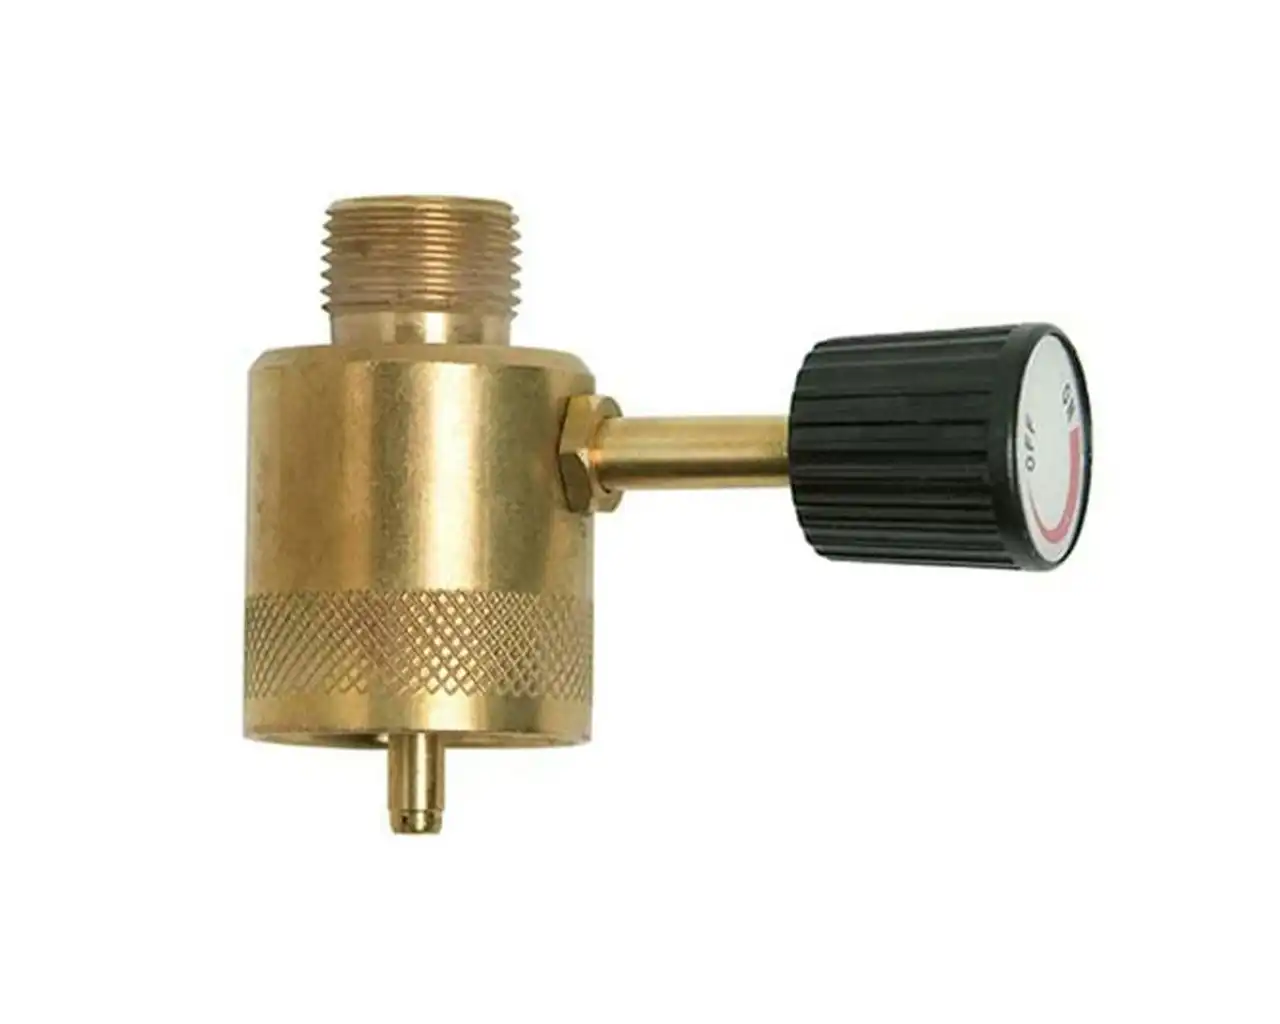 Gasmate Adaptor - 1 UNEF outlet to 3/8 BSP-L